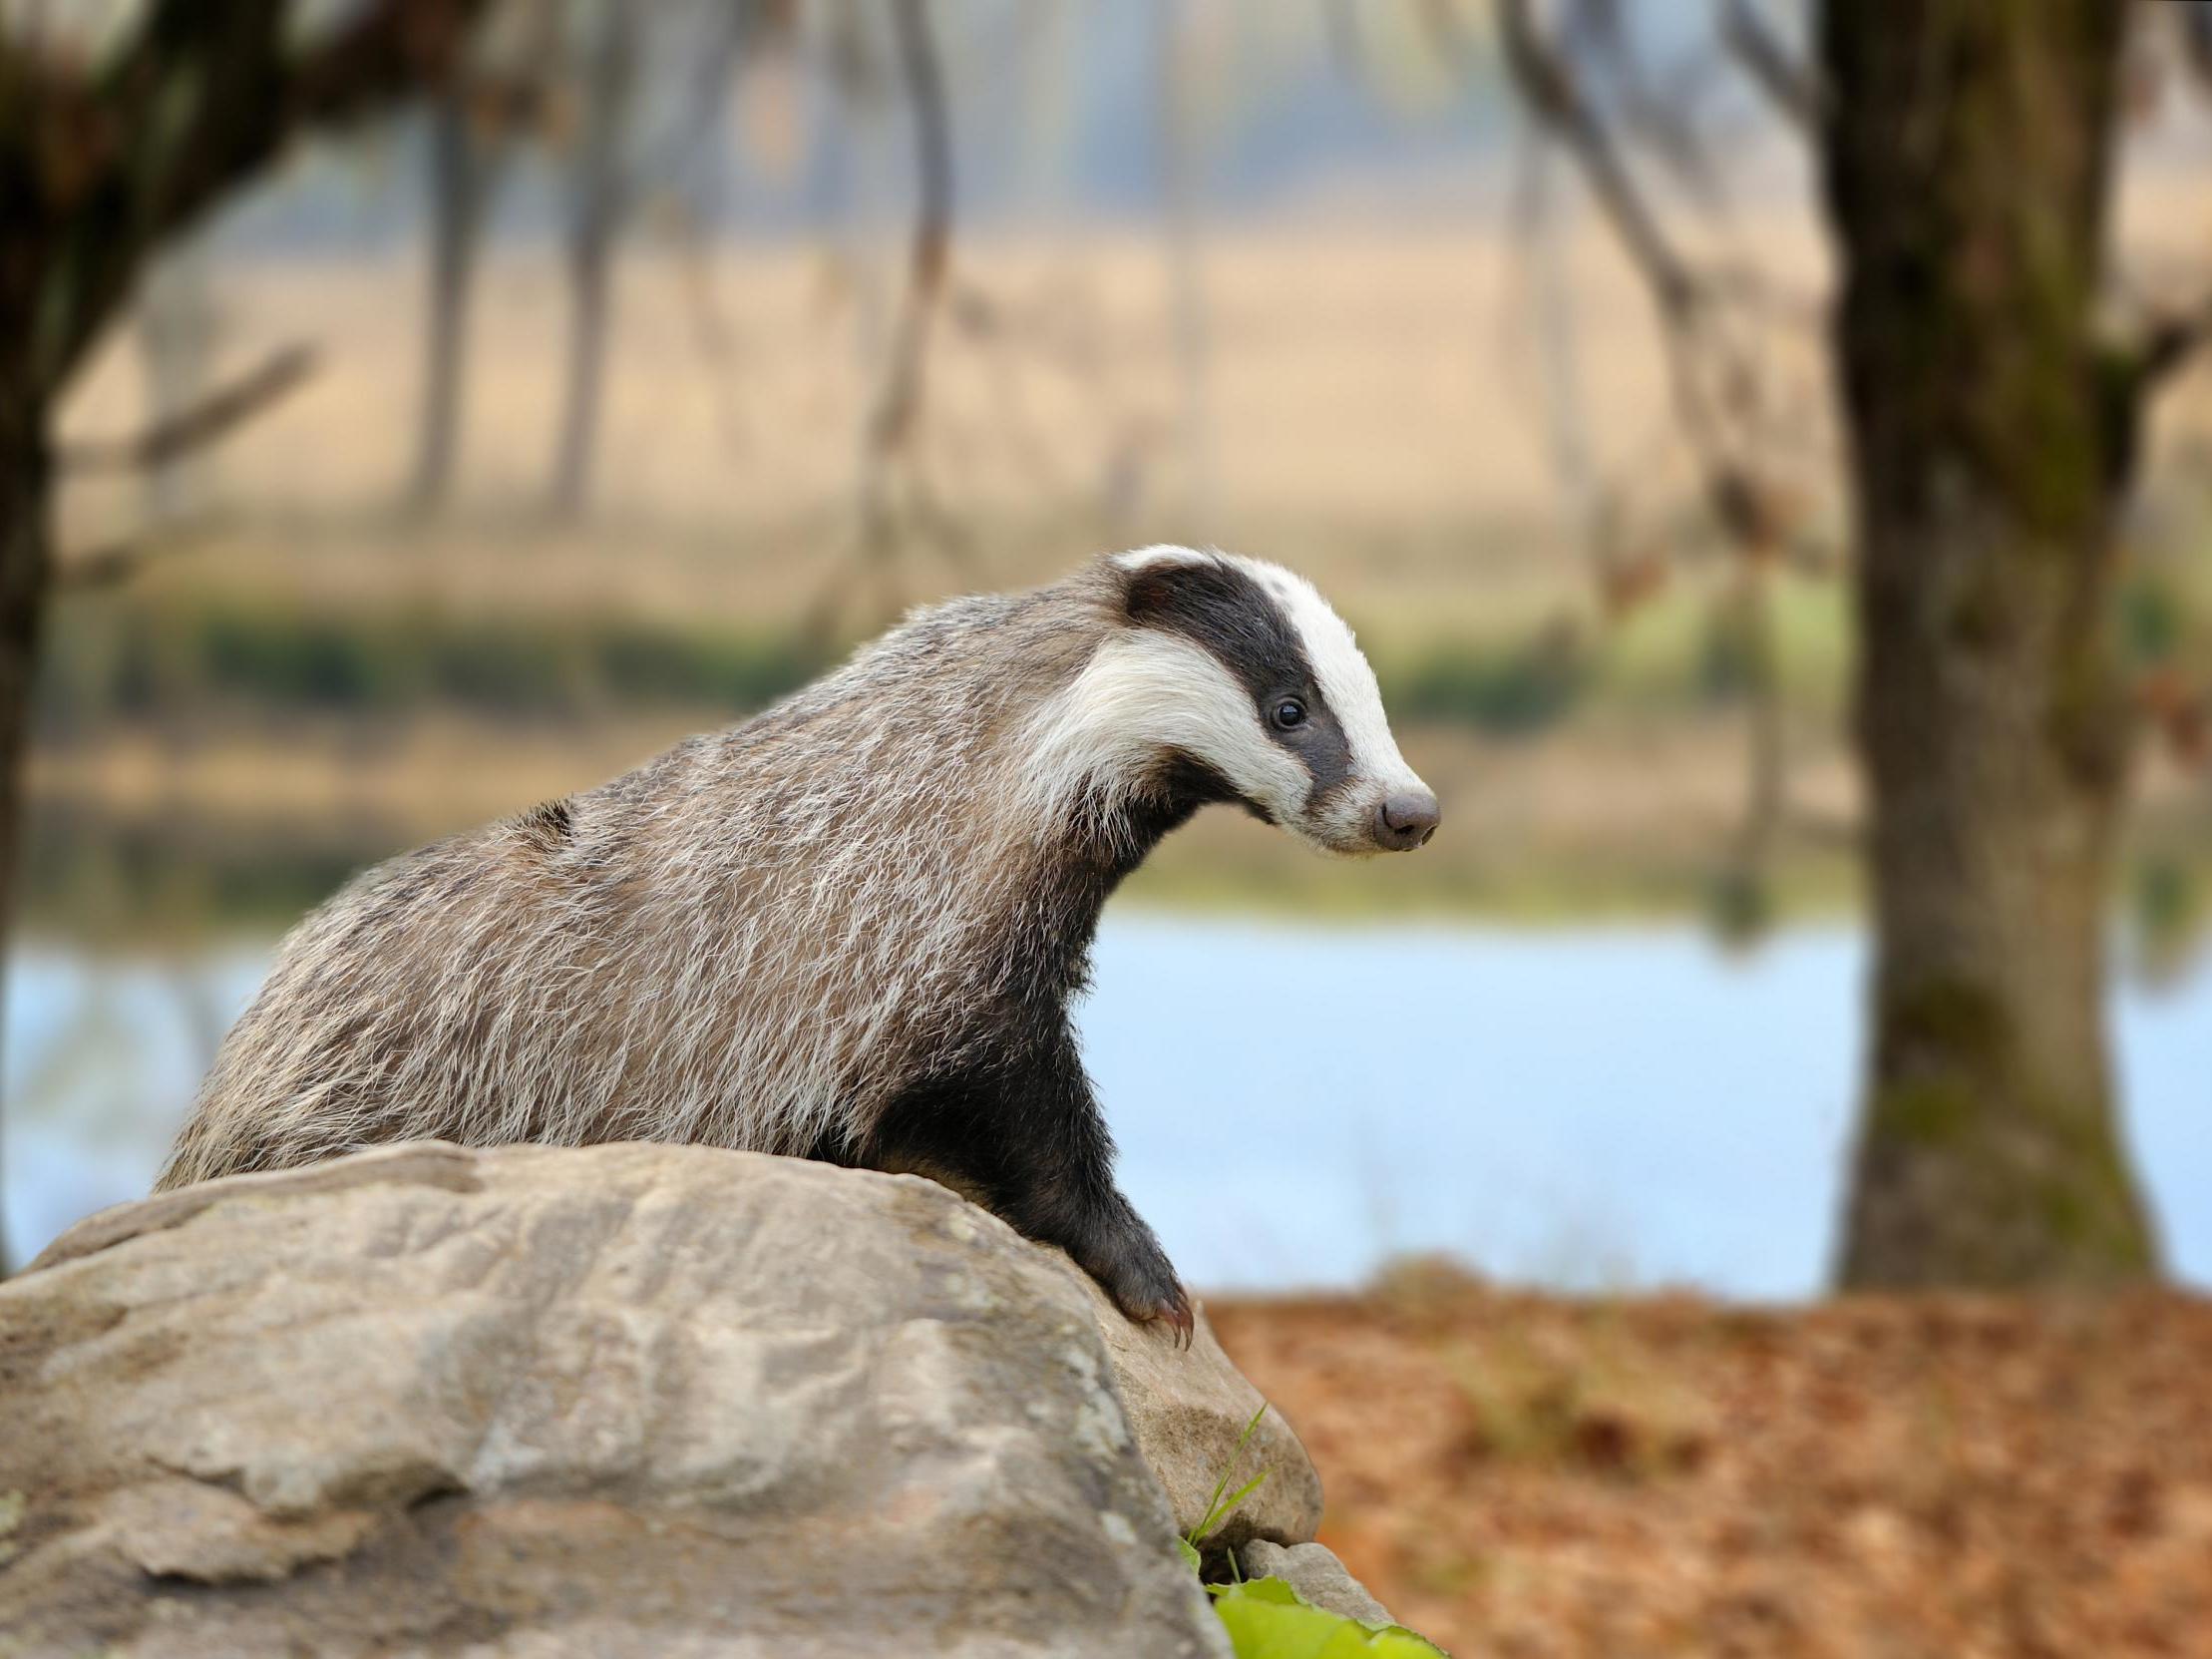 Thousands of badgers shot are likely to have suffered "immense pain" before dying, experts say